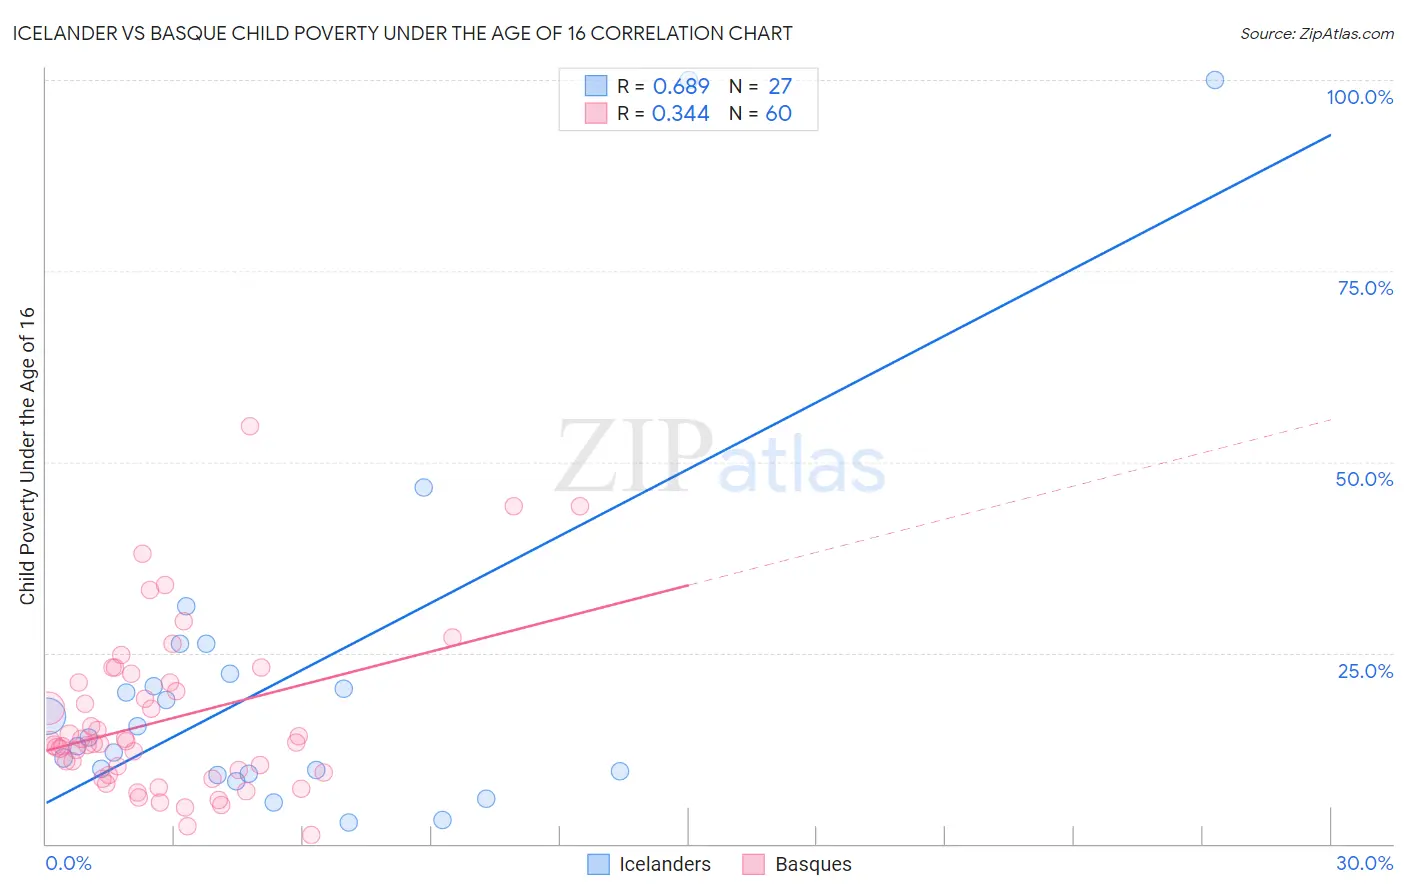 Icelander vs Basque Child Poverty Under the Age of 16